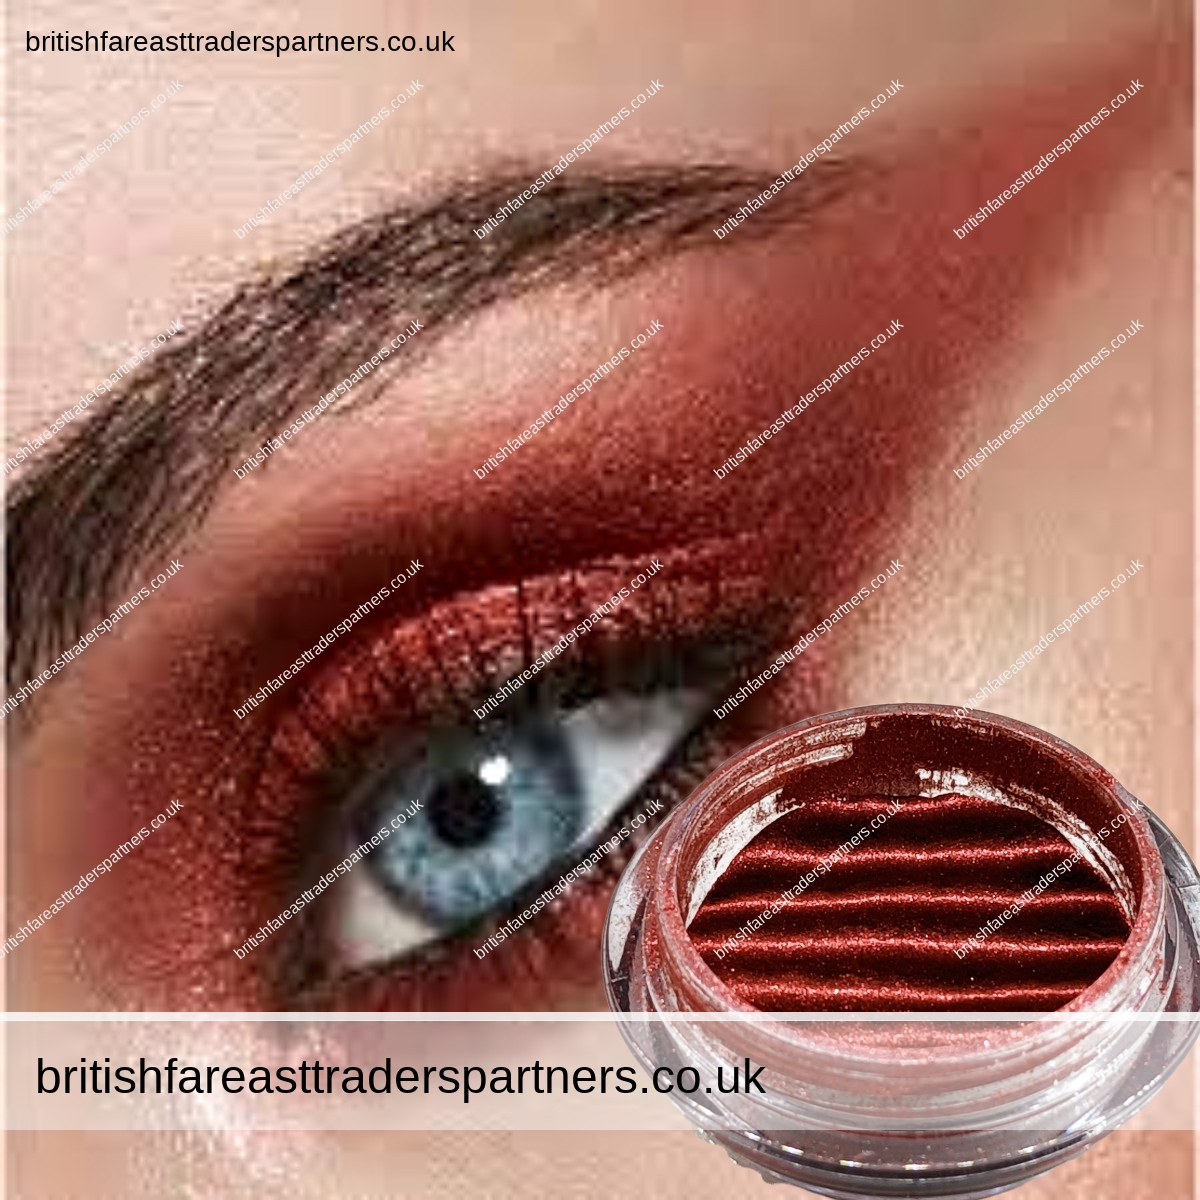 AVON MARK OH SO TOKYO ELECTRIC SHADOWS IN MAPLE RED EYESHADOW IN A POT BEAUTY | BRITISH | UNITED KINGDOM AVON | MAKE-UP | EYESHADOWS SELF CARE | ME TIME |  LIFESTYLE & CULTURE